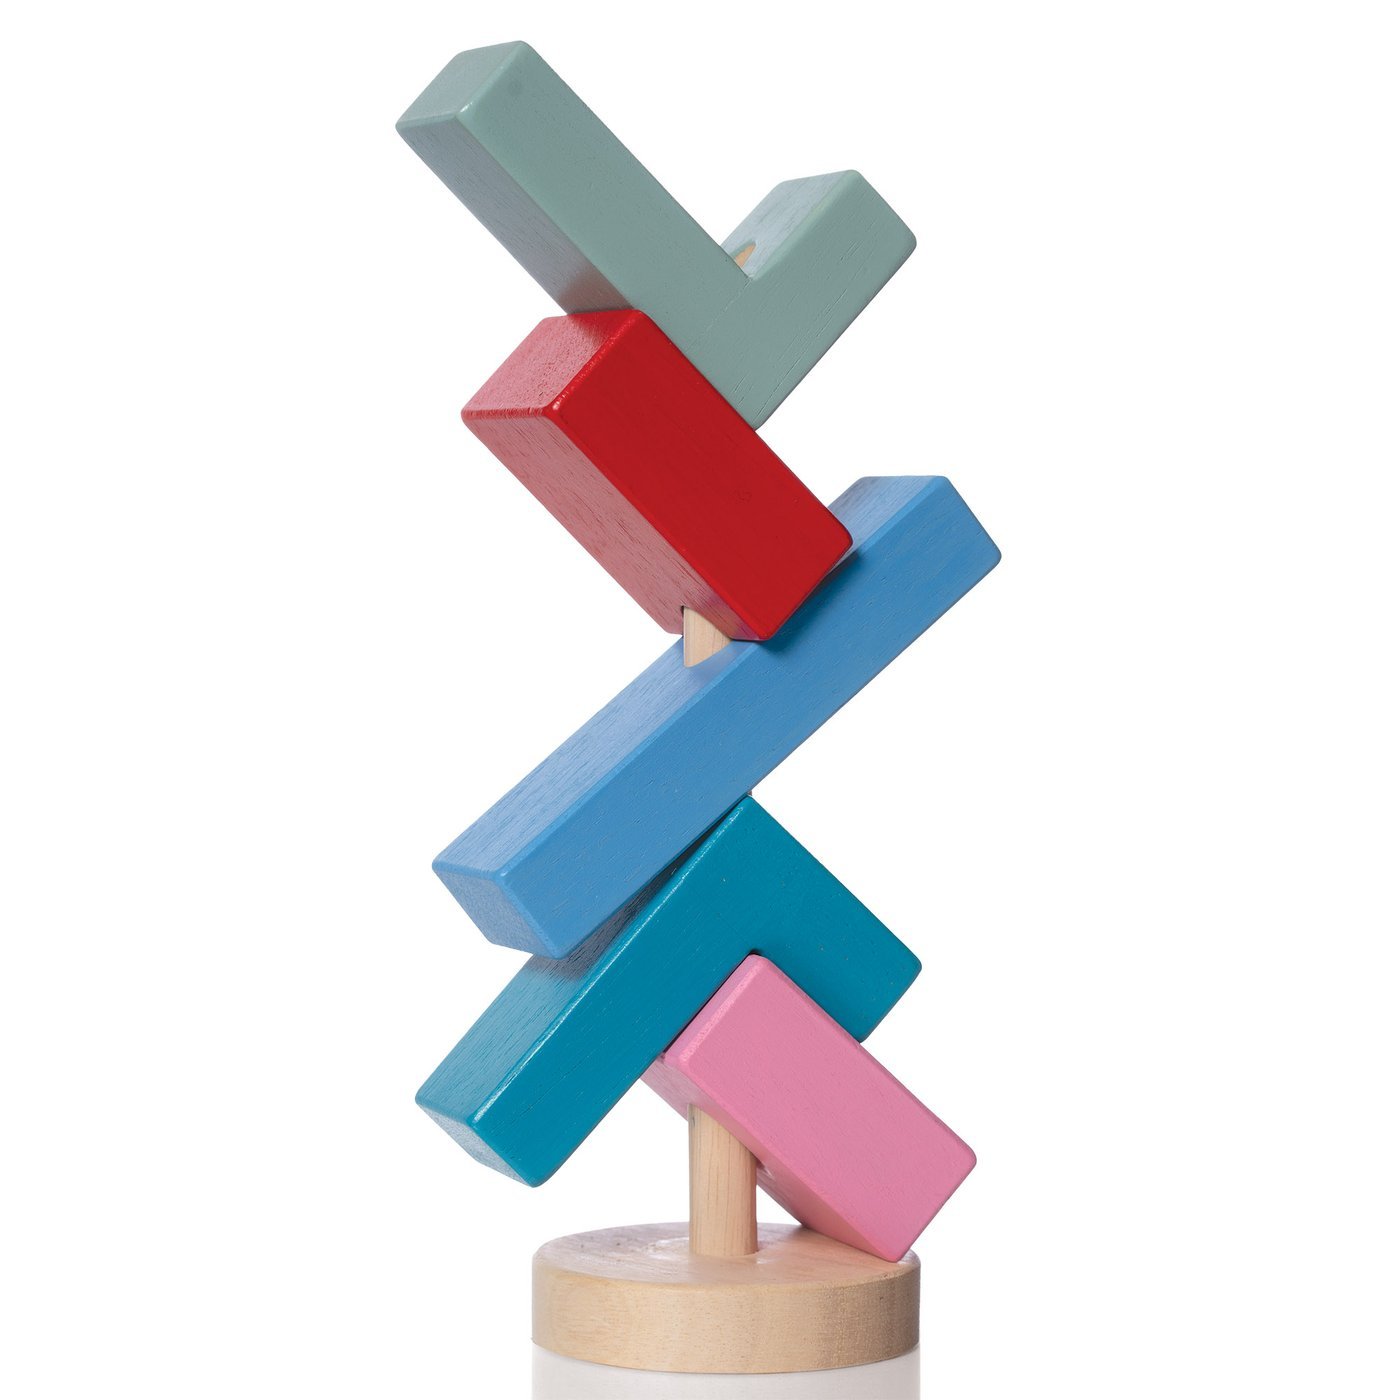 Bam Stack-a-Lacka Stacker by Manhattan Toy - Wood Wood Toys Canada's Favourite Montessori Toy Store